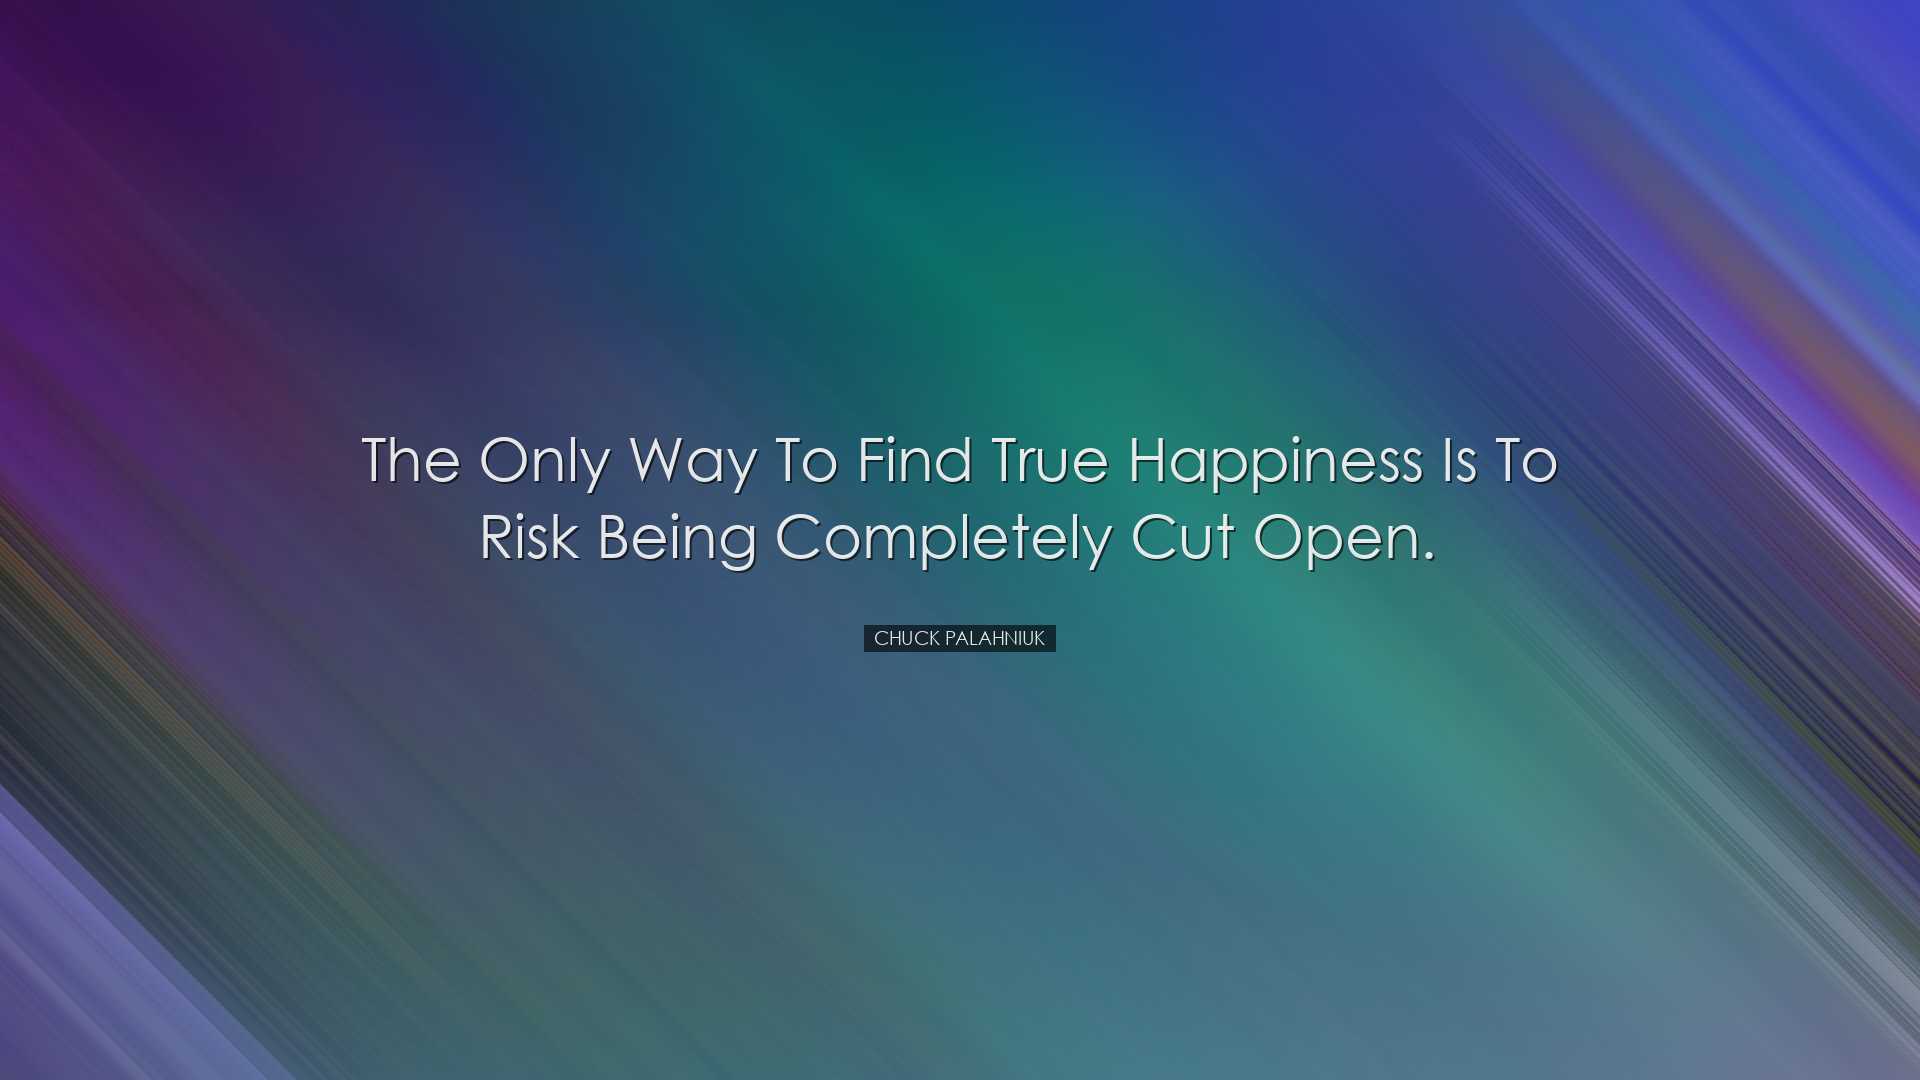 The only way to find true happiness is to risk being completely cu